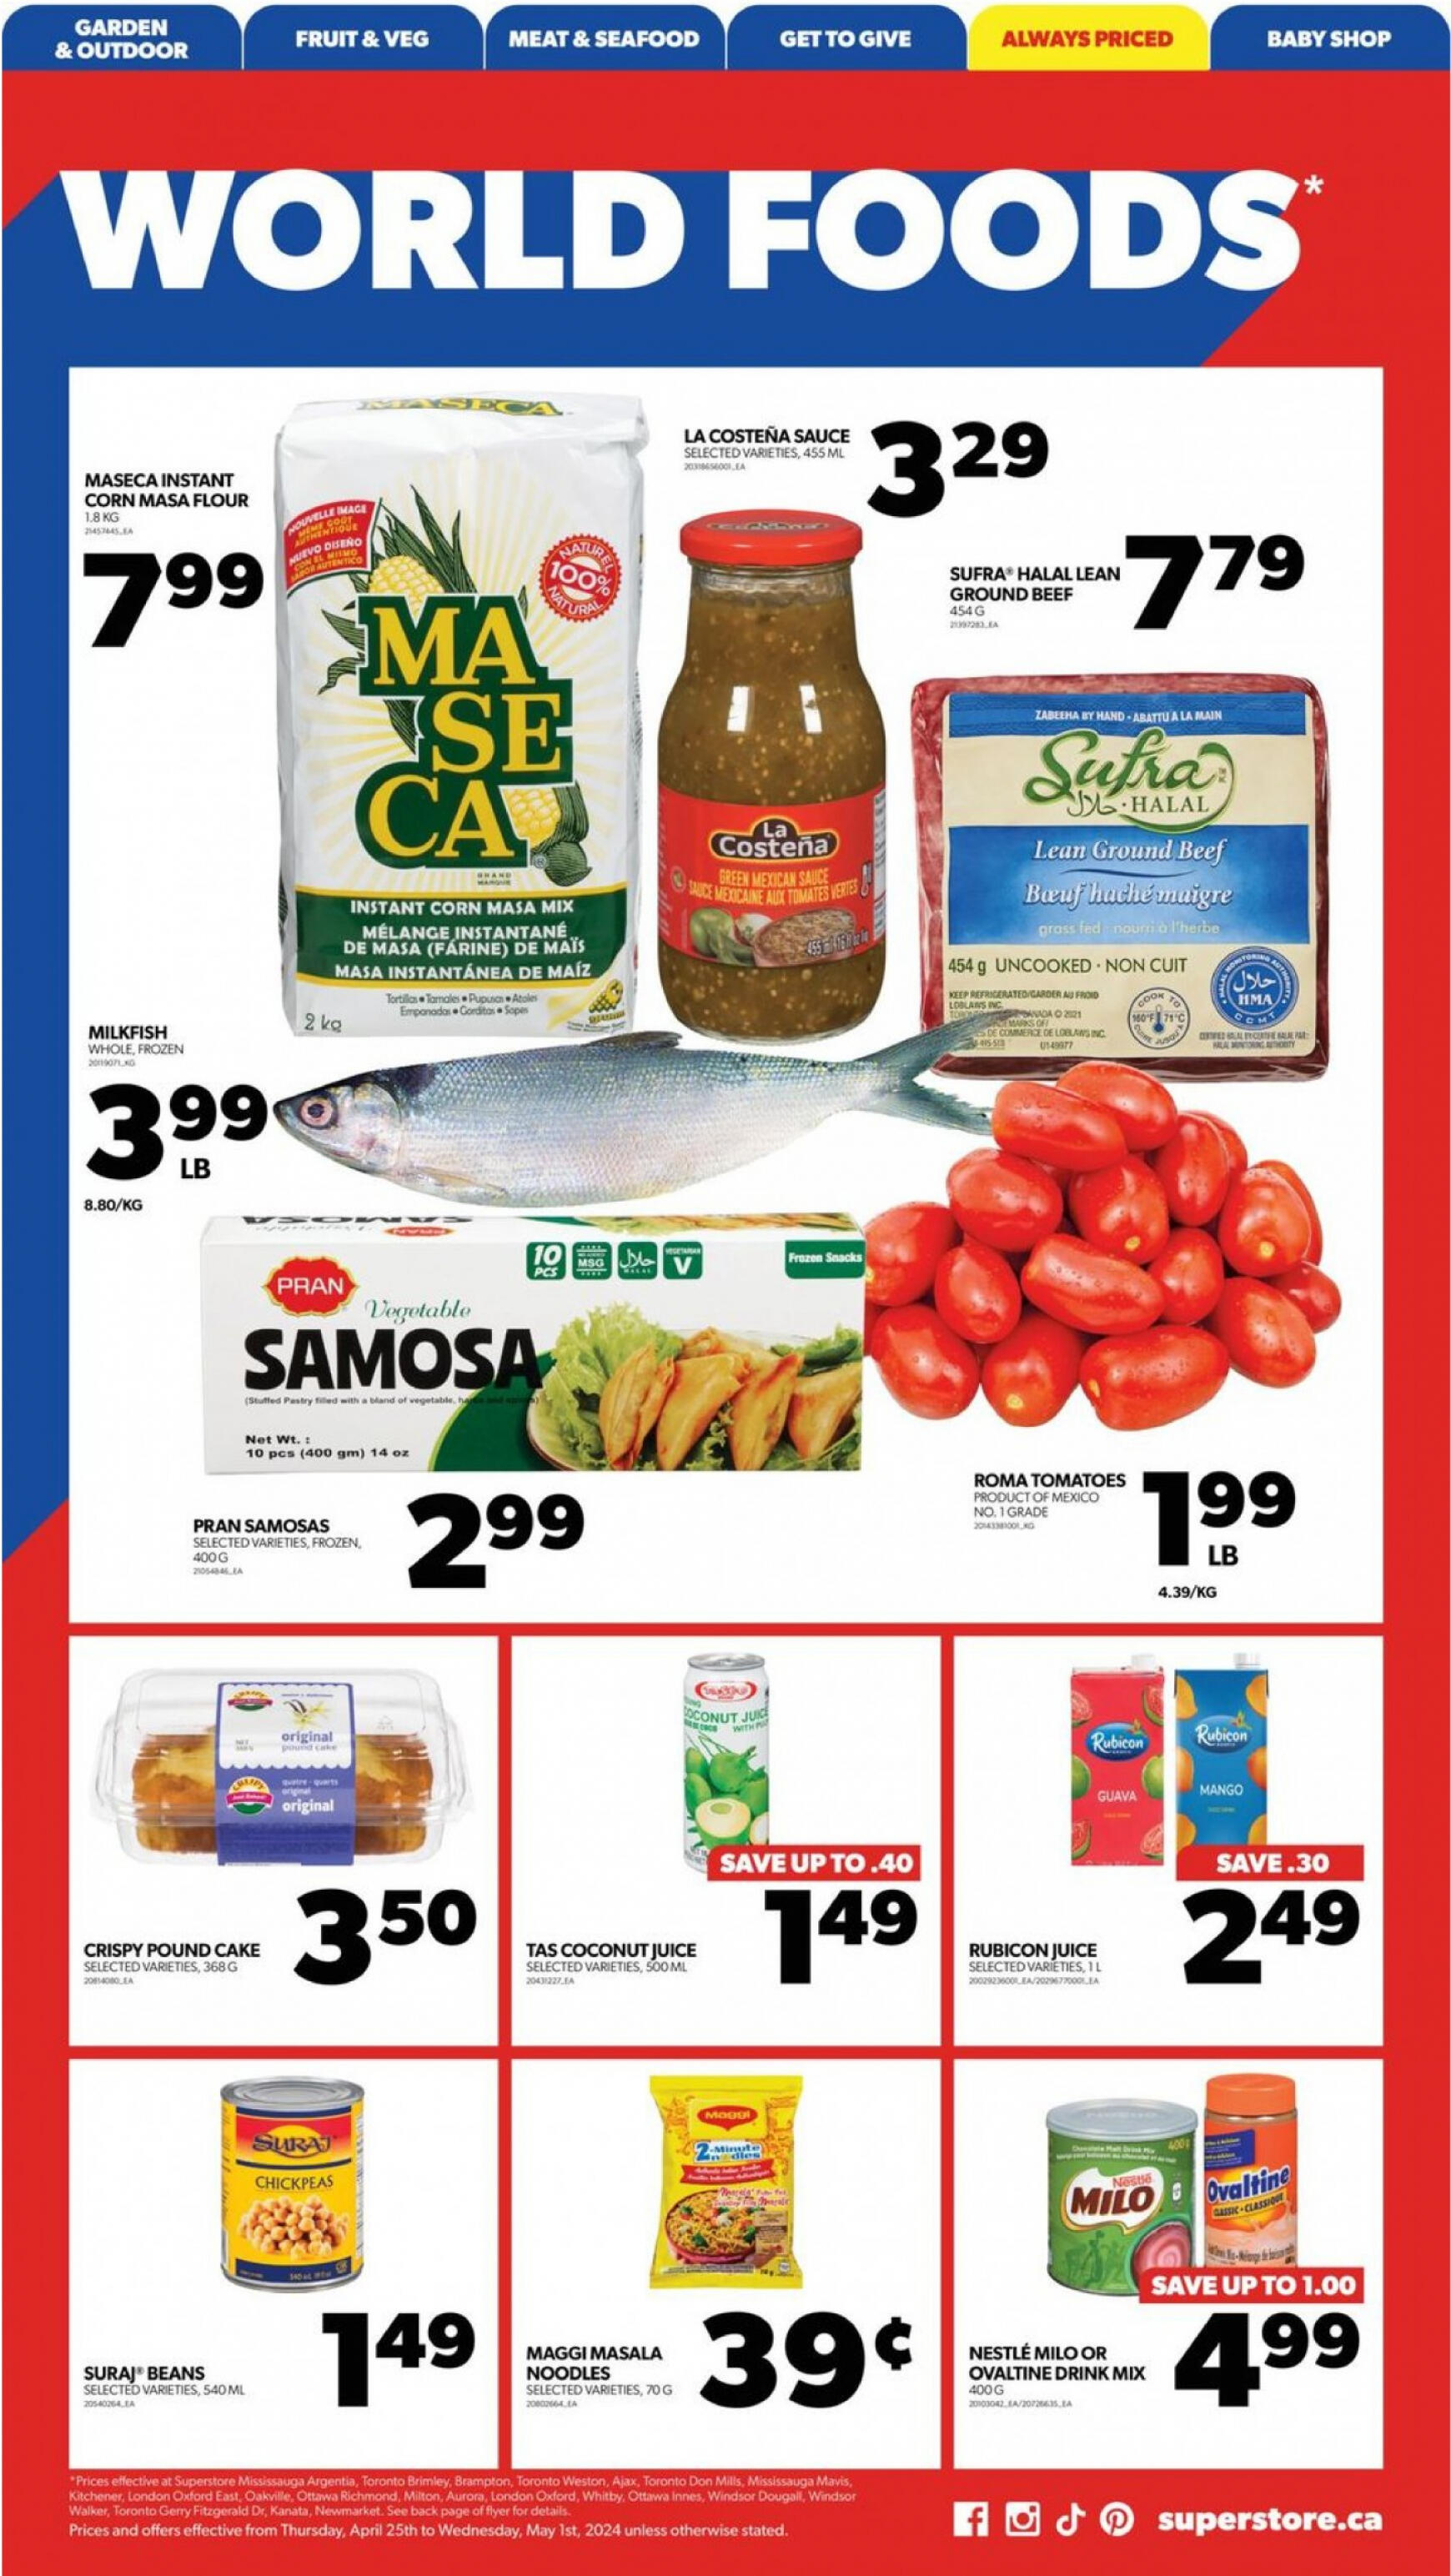 real-canadian-superstore - Real Canadian Superstore flyer current 01.05. - 31.05. - page: 31